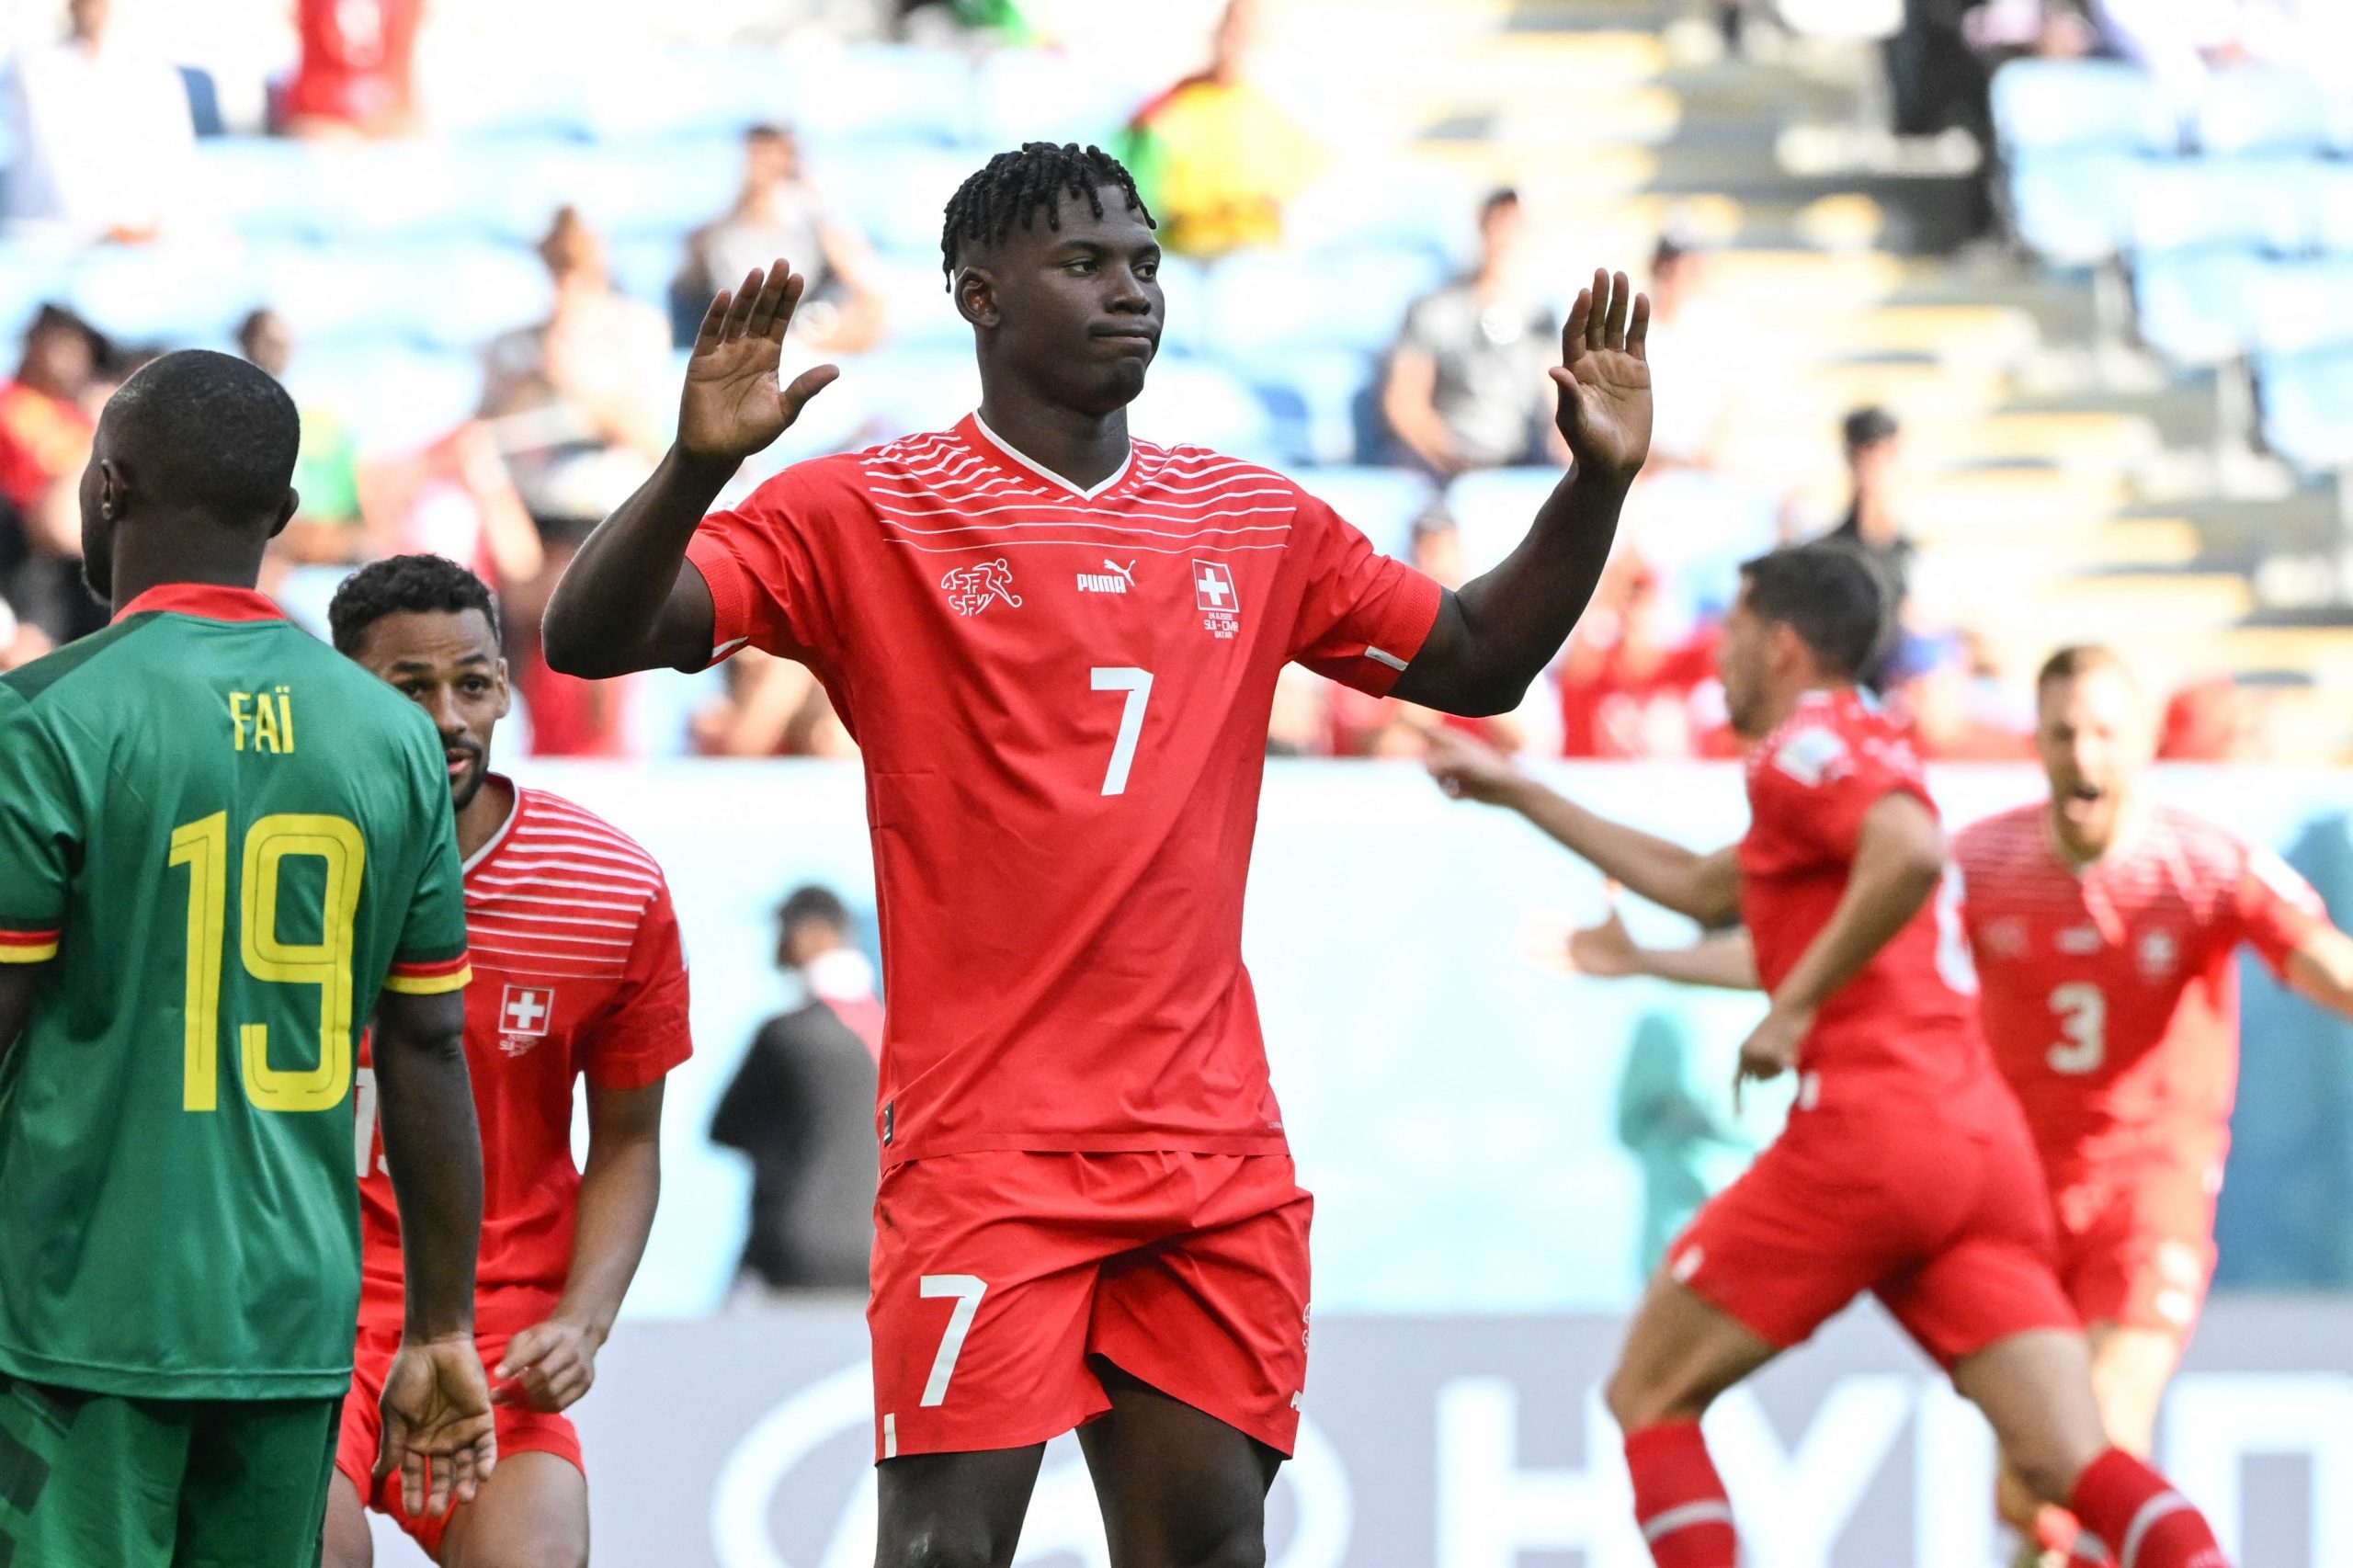 Apologetic Embolo gives Swiss 1-0 victory over Cameroon | The Stratford Beacon Herald - Stratford Beacon-Herald